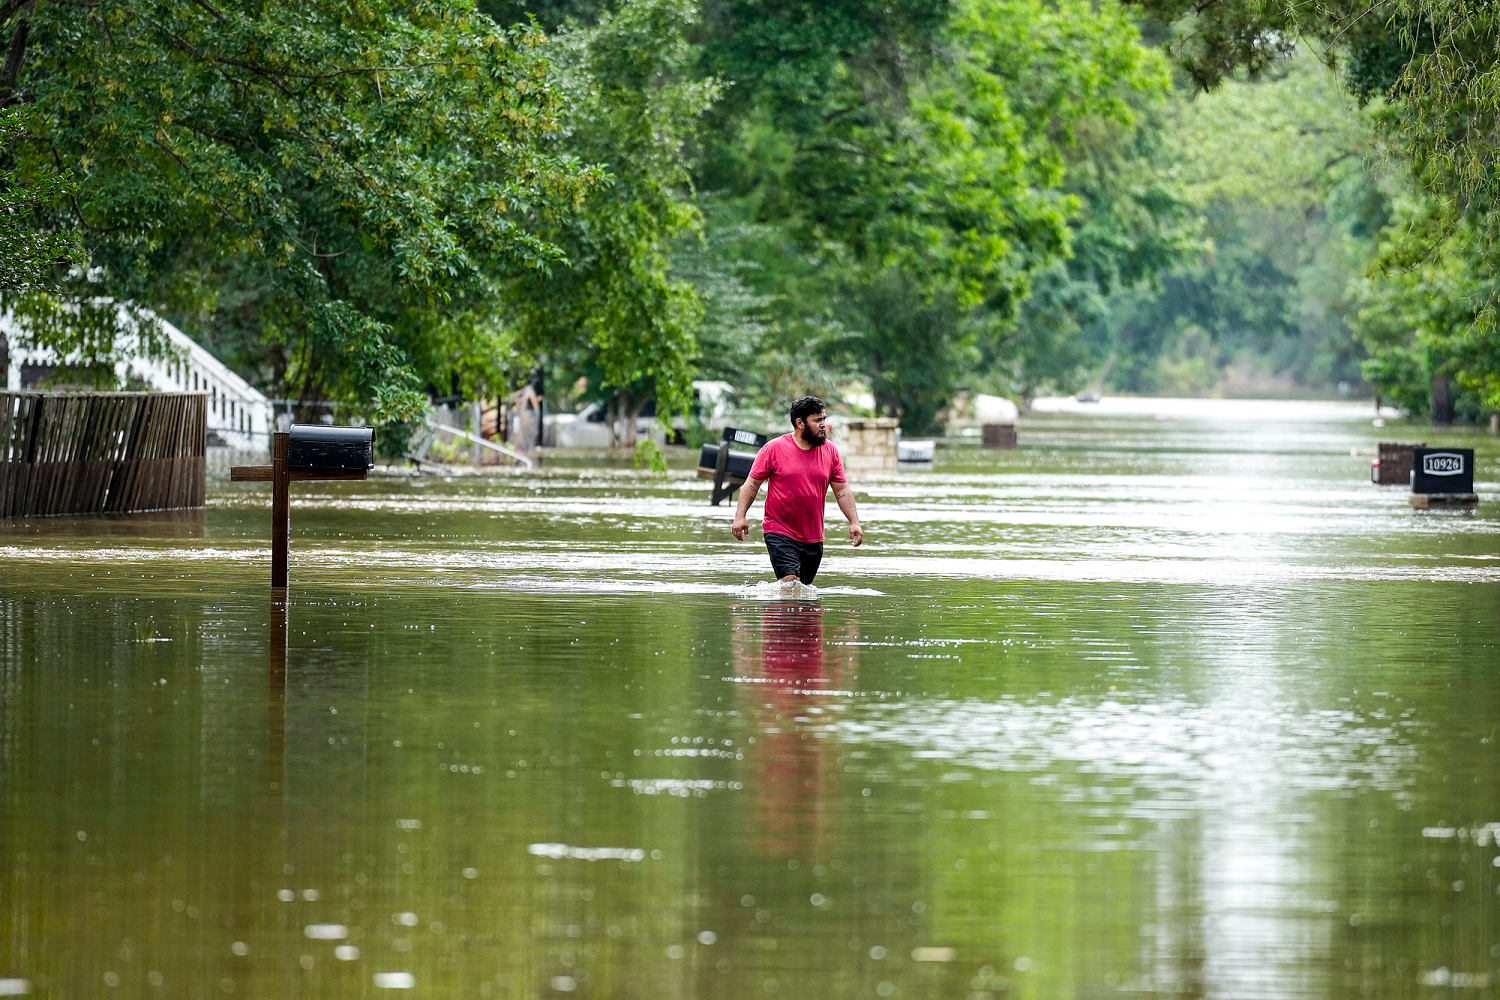 More storms move through Houston area, where hundreds have been rescued from floodwaters